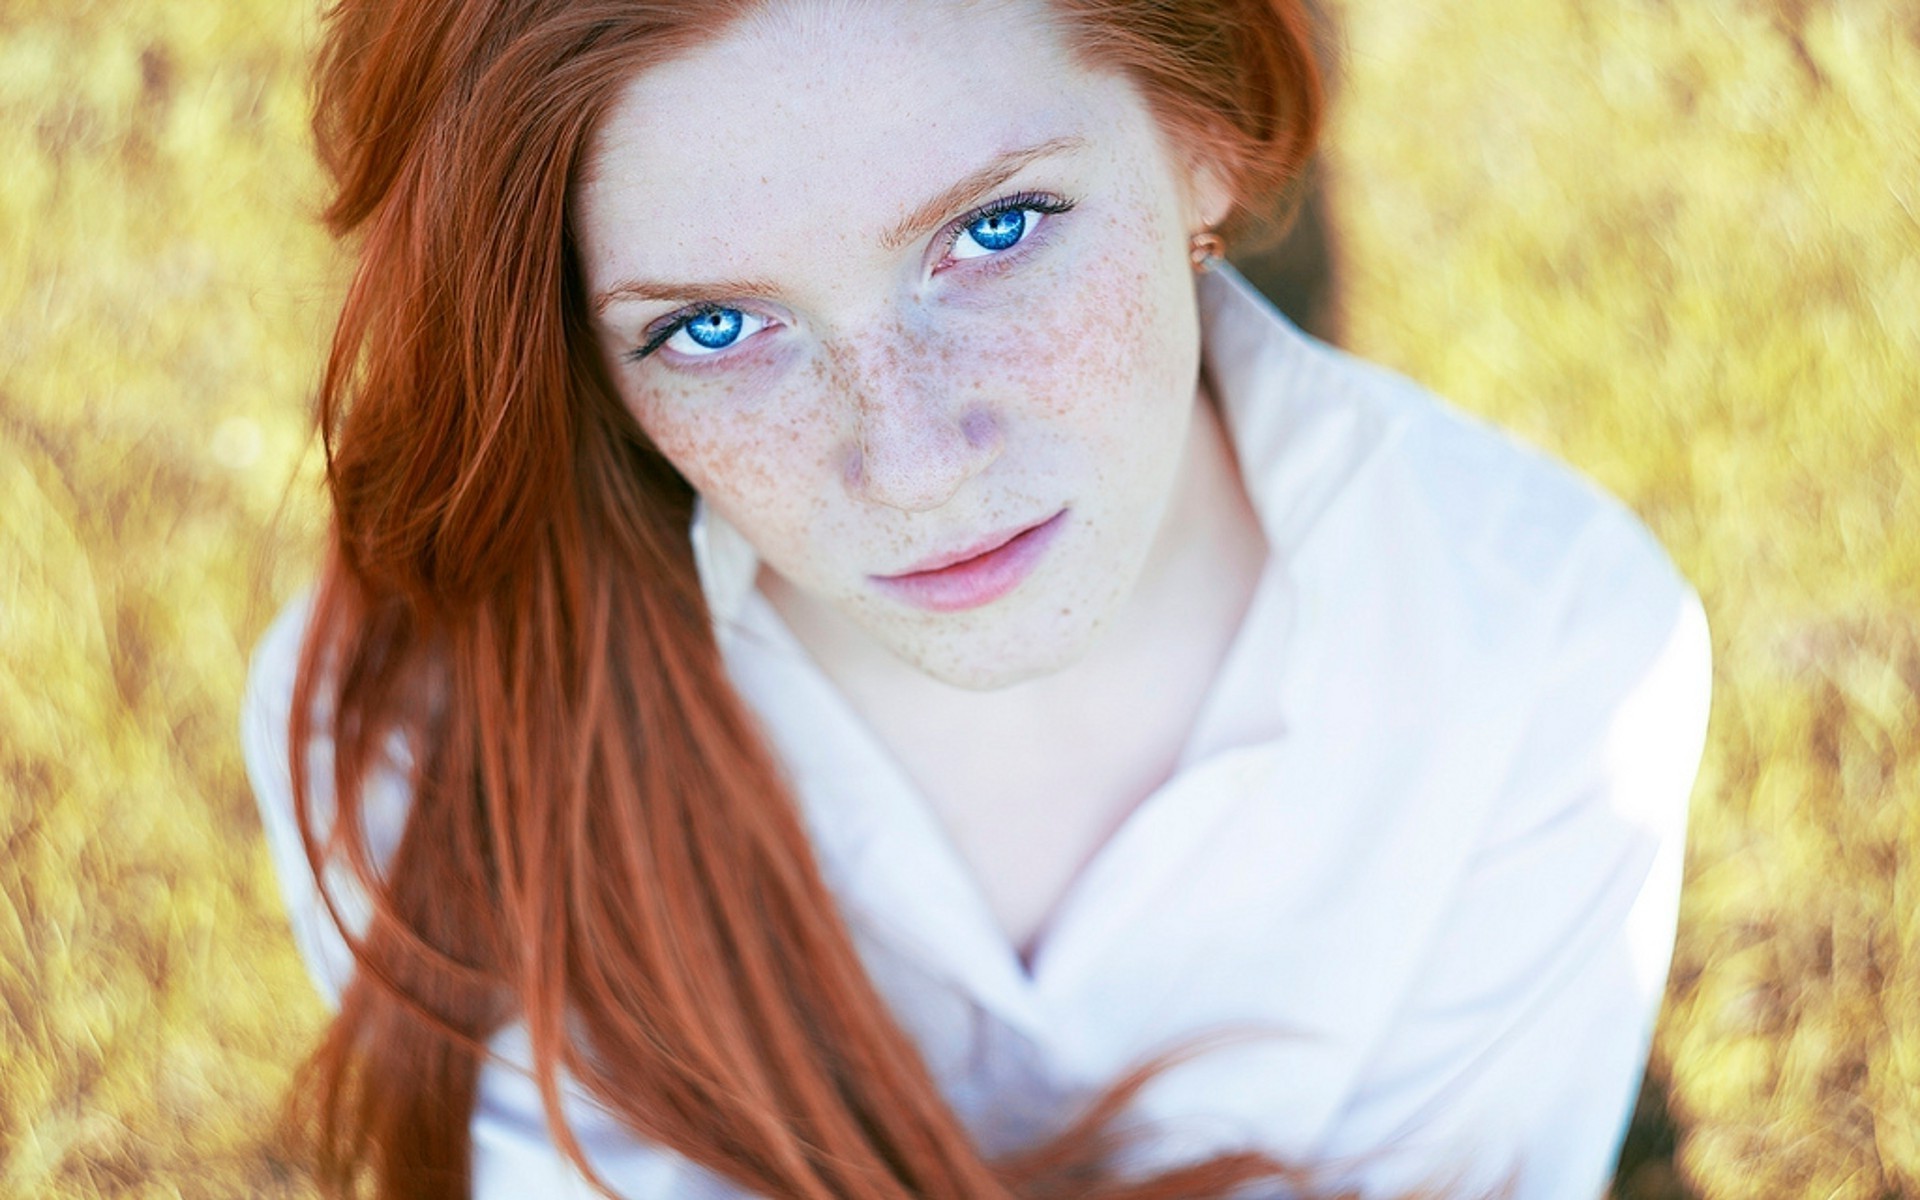 women, Redhead, Freckles, Blue Eyes, Looking At Viewer